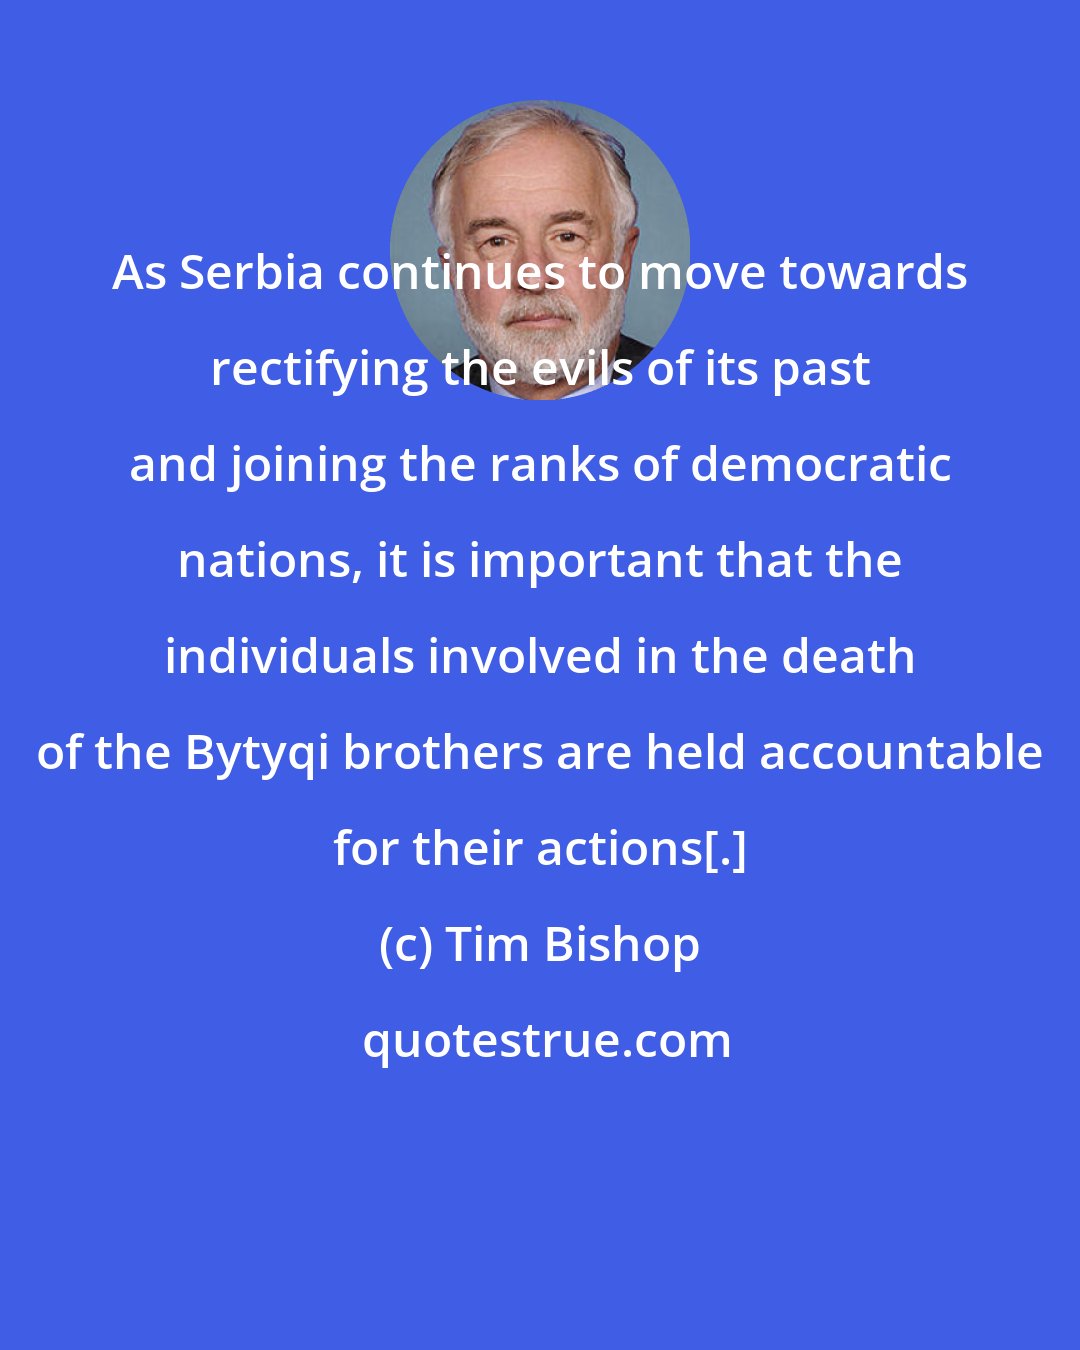 Tim Bishop: As Serbia continues to move towards rectifying the evils of its past and joining the ranks of democratic nations, it is important that the individuals involved in the death of the Bytyqi brothers are held accountable for their actions[.]